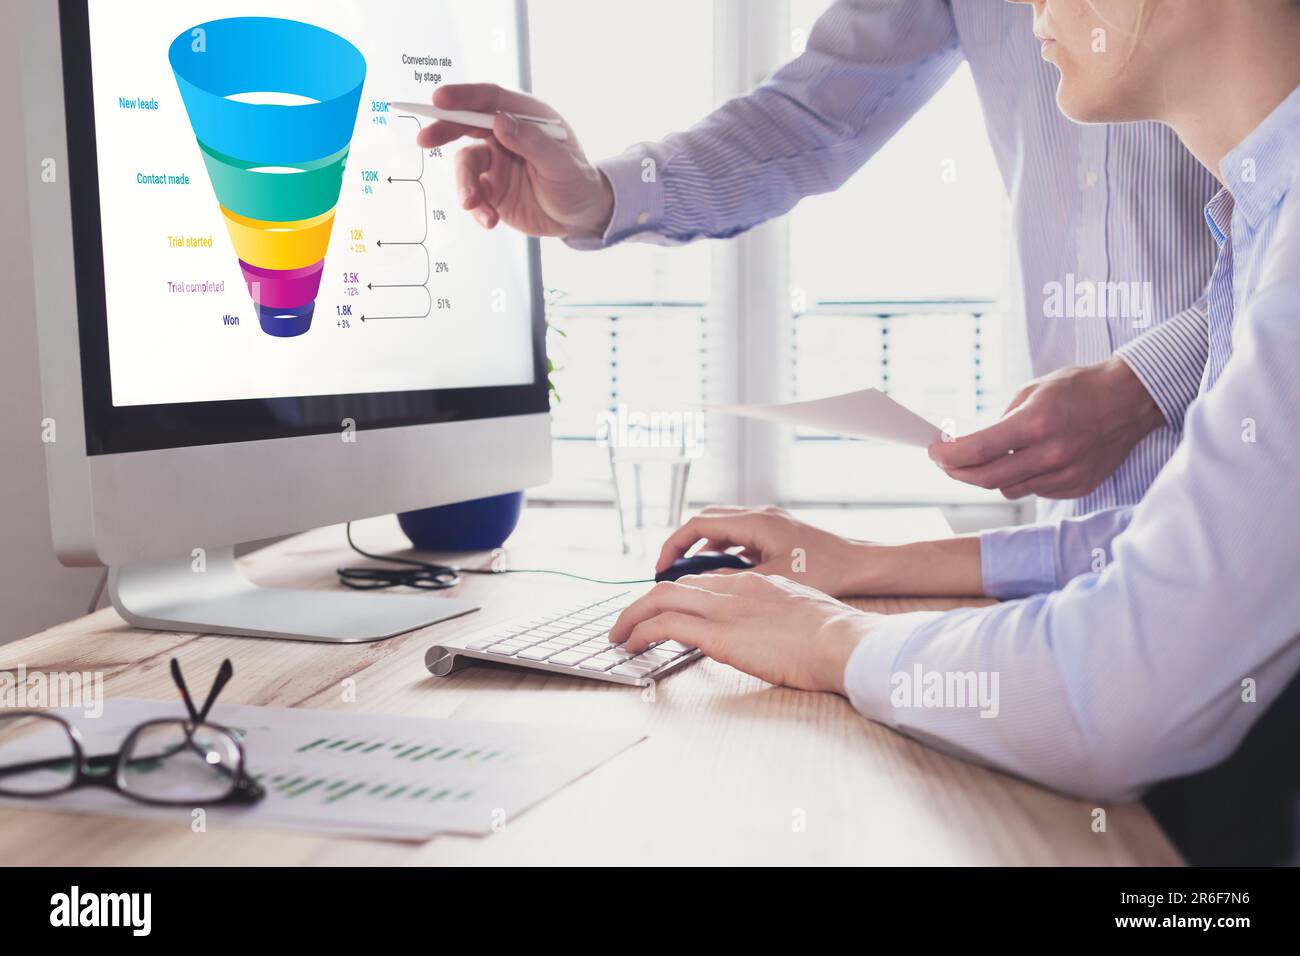 Marketing funnel and data analytics used by a team of sales consultant to analyze leads generation, conversion rate, and sales performance of e-commer Stock Photo